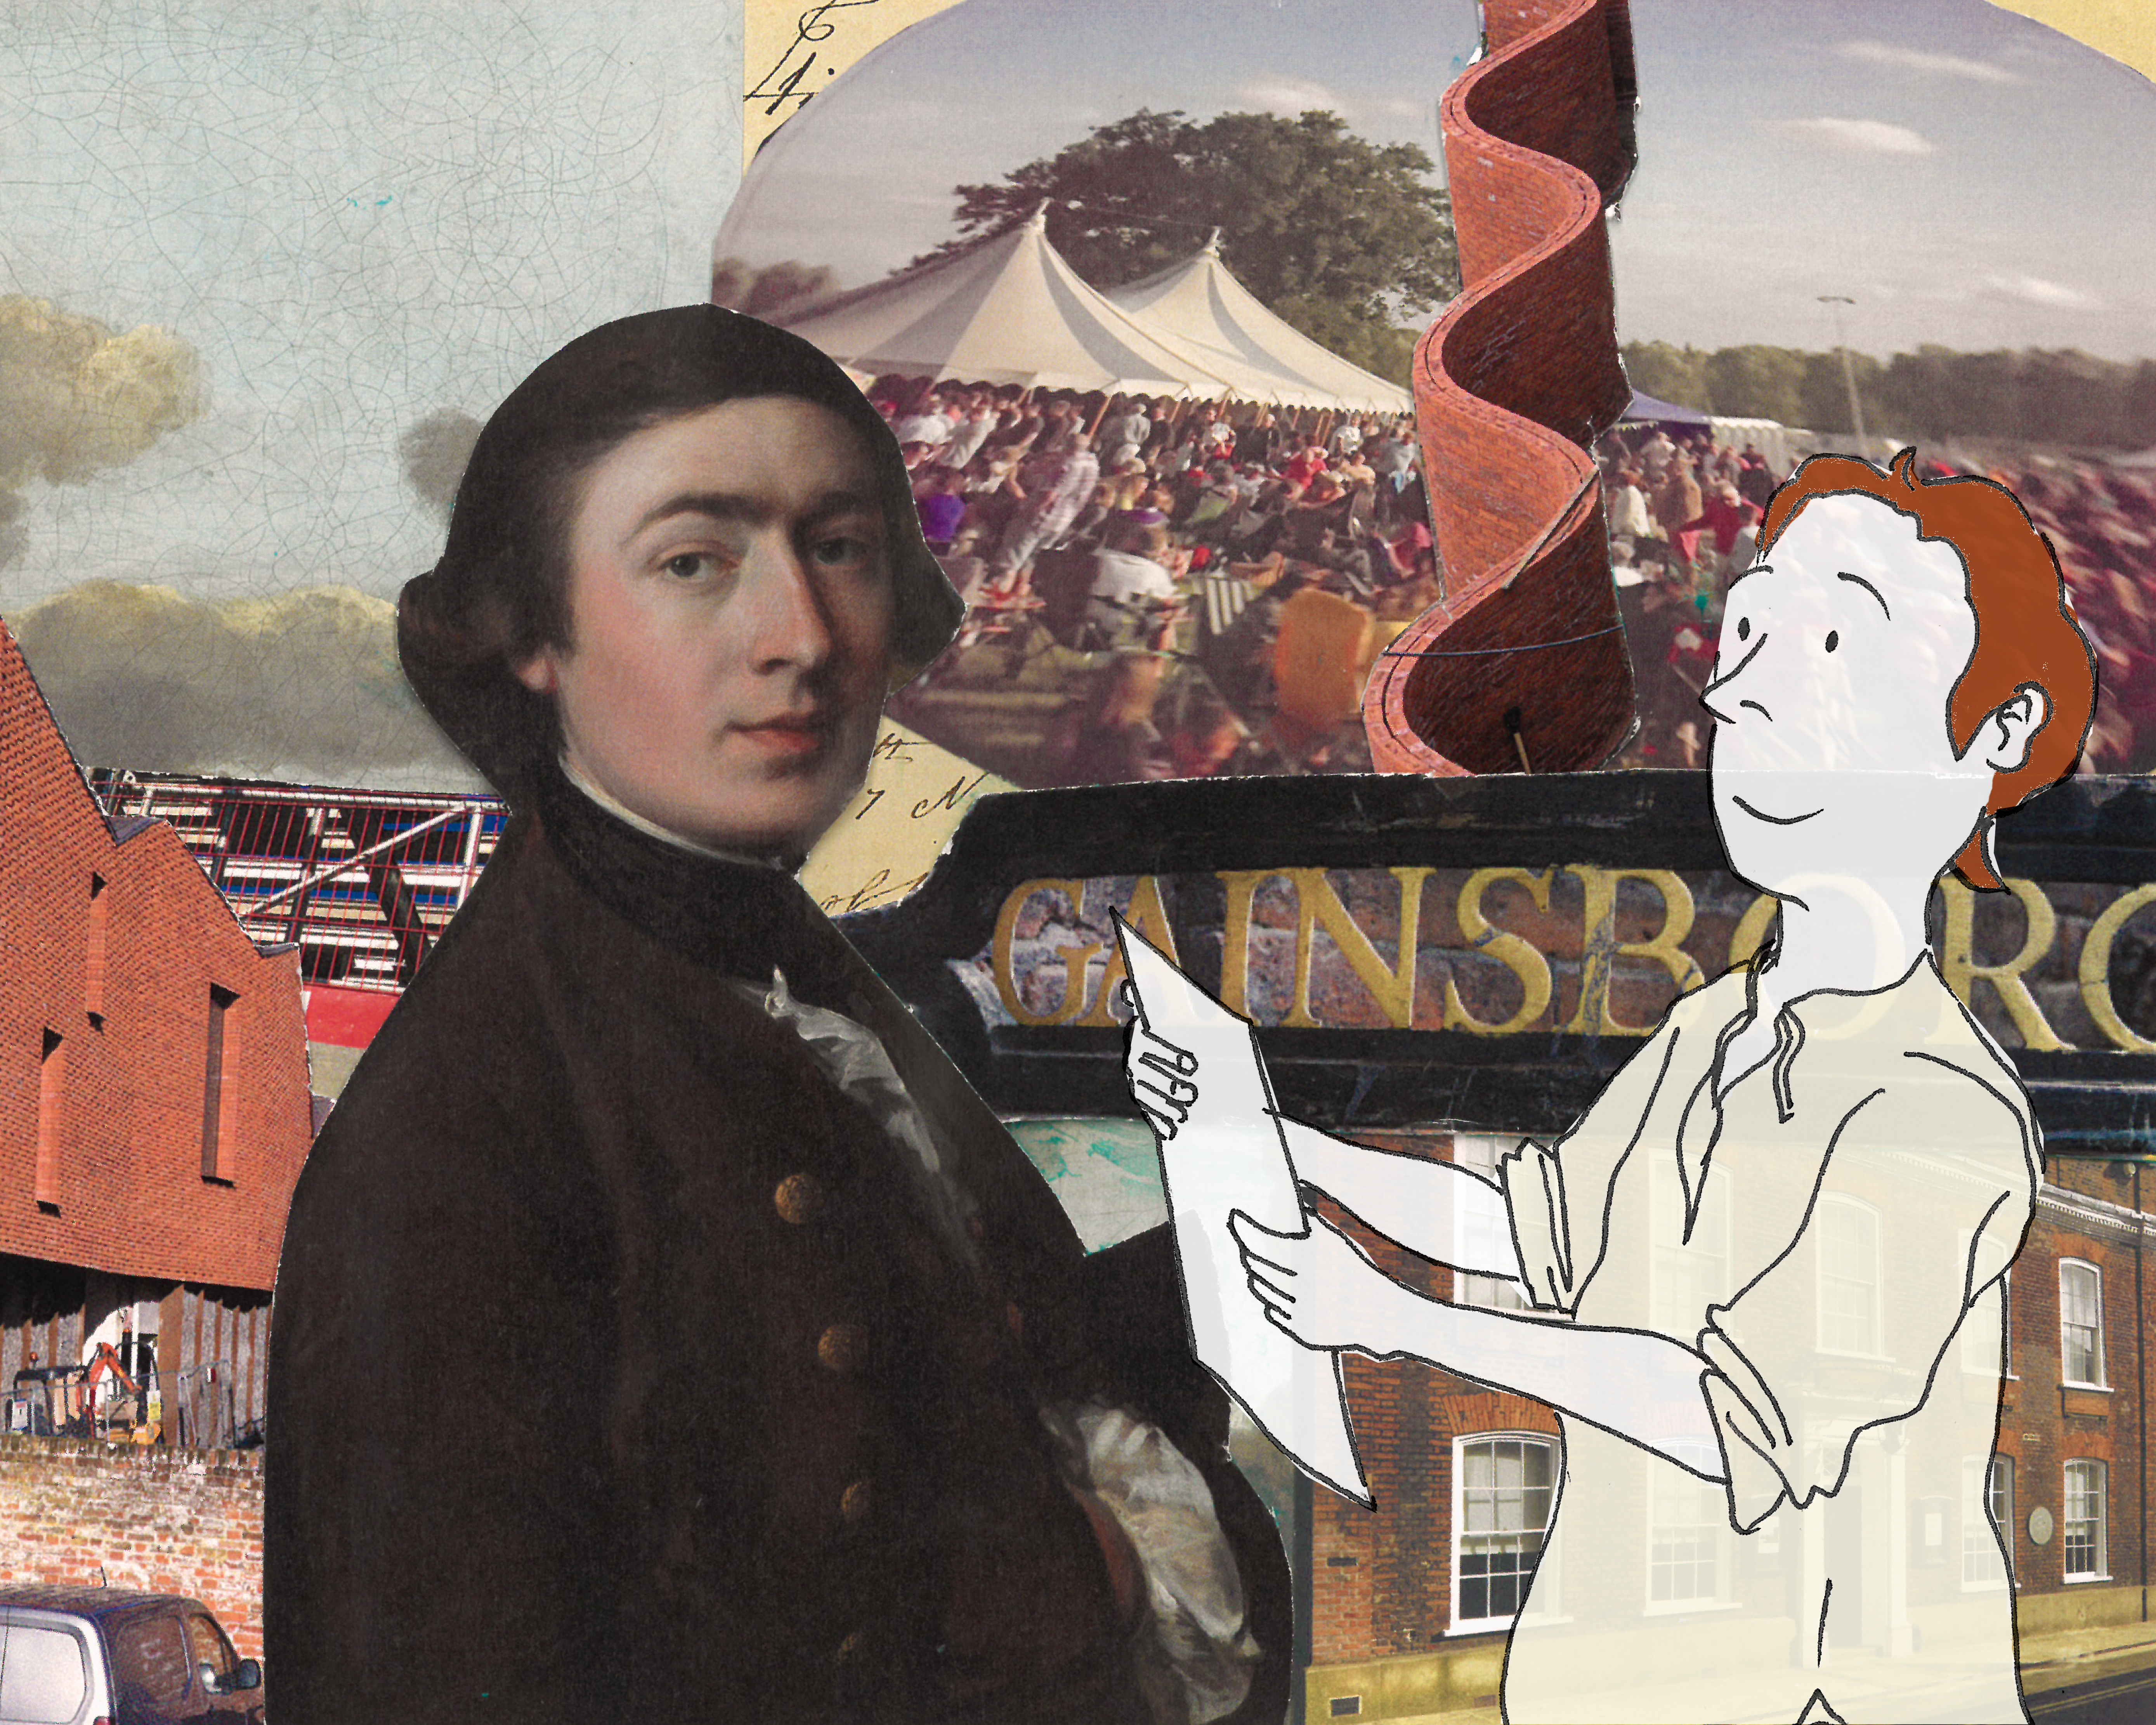 An image of a Gainsborough inspired art collage. Overlayed is a character illustration of Thomas Gainsborough.